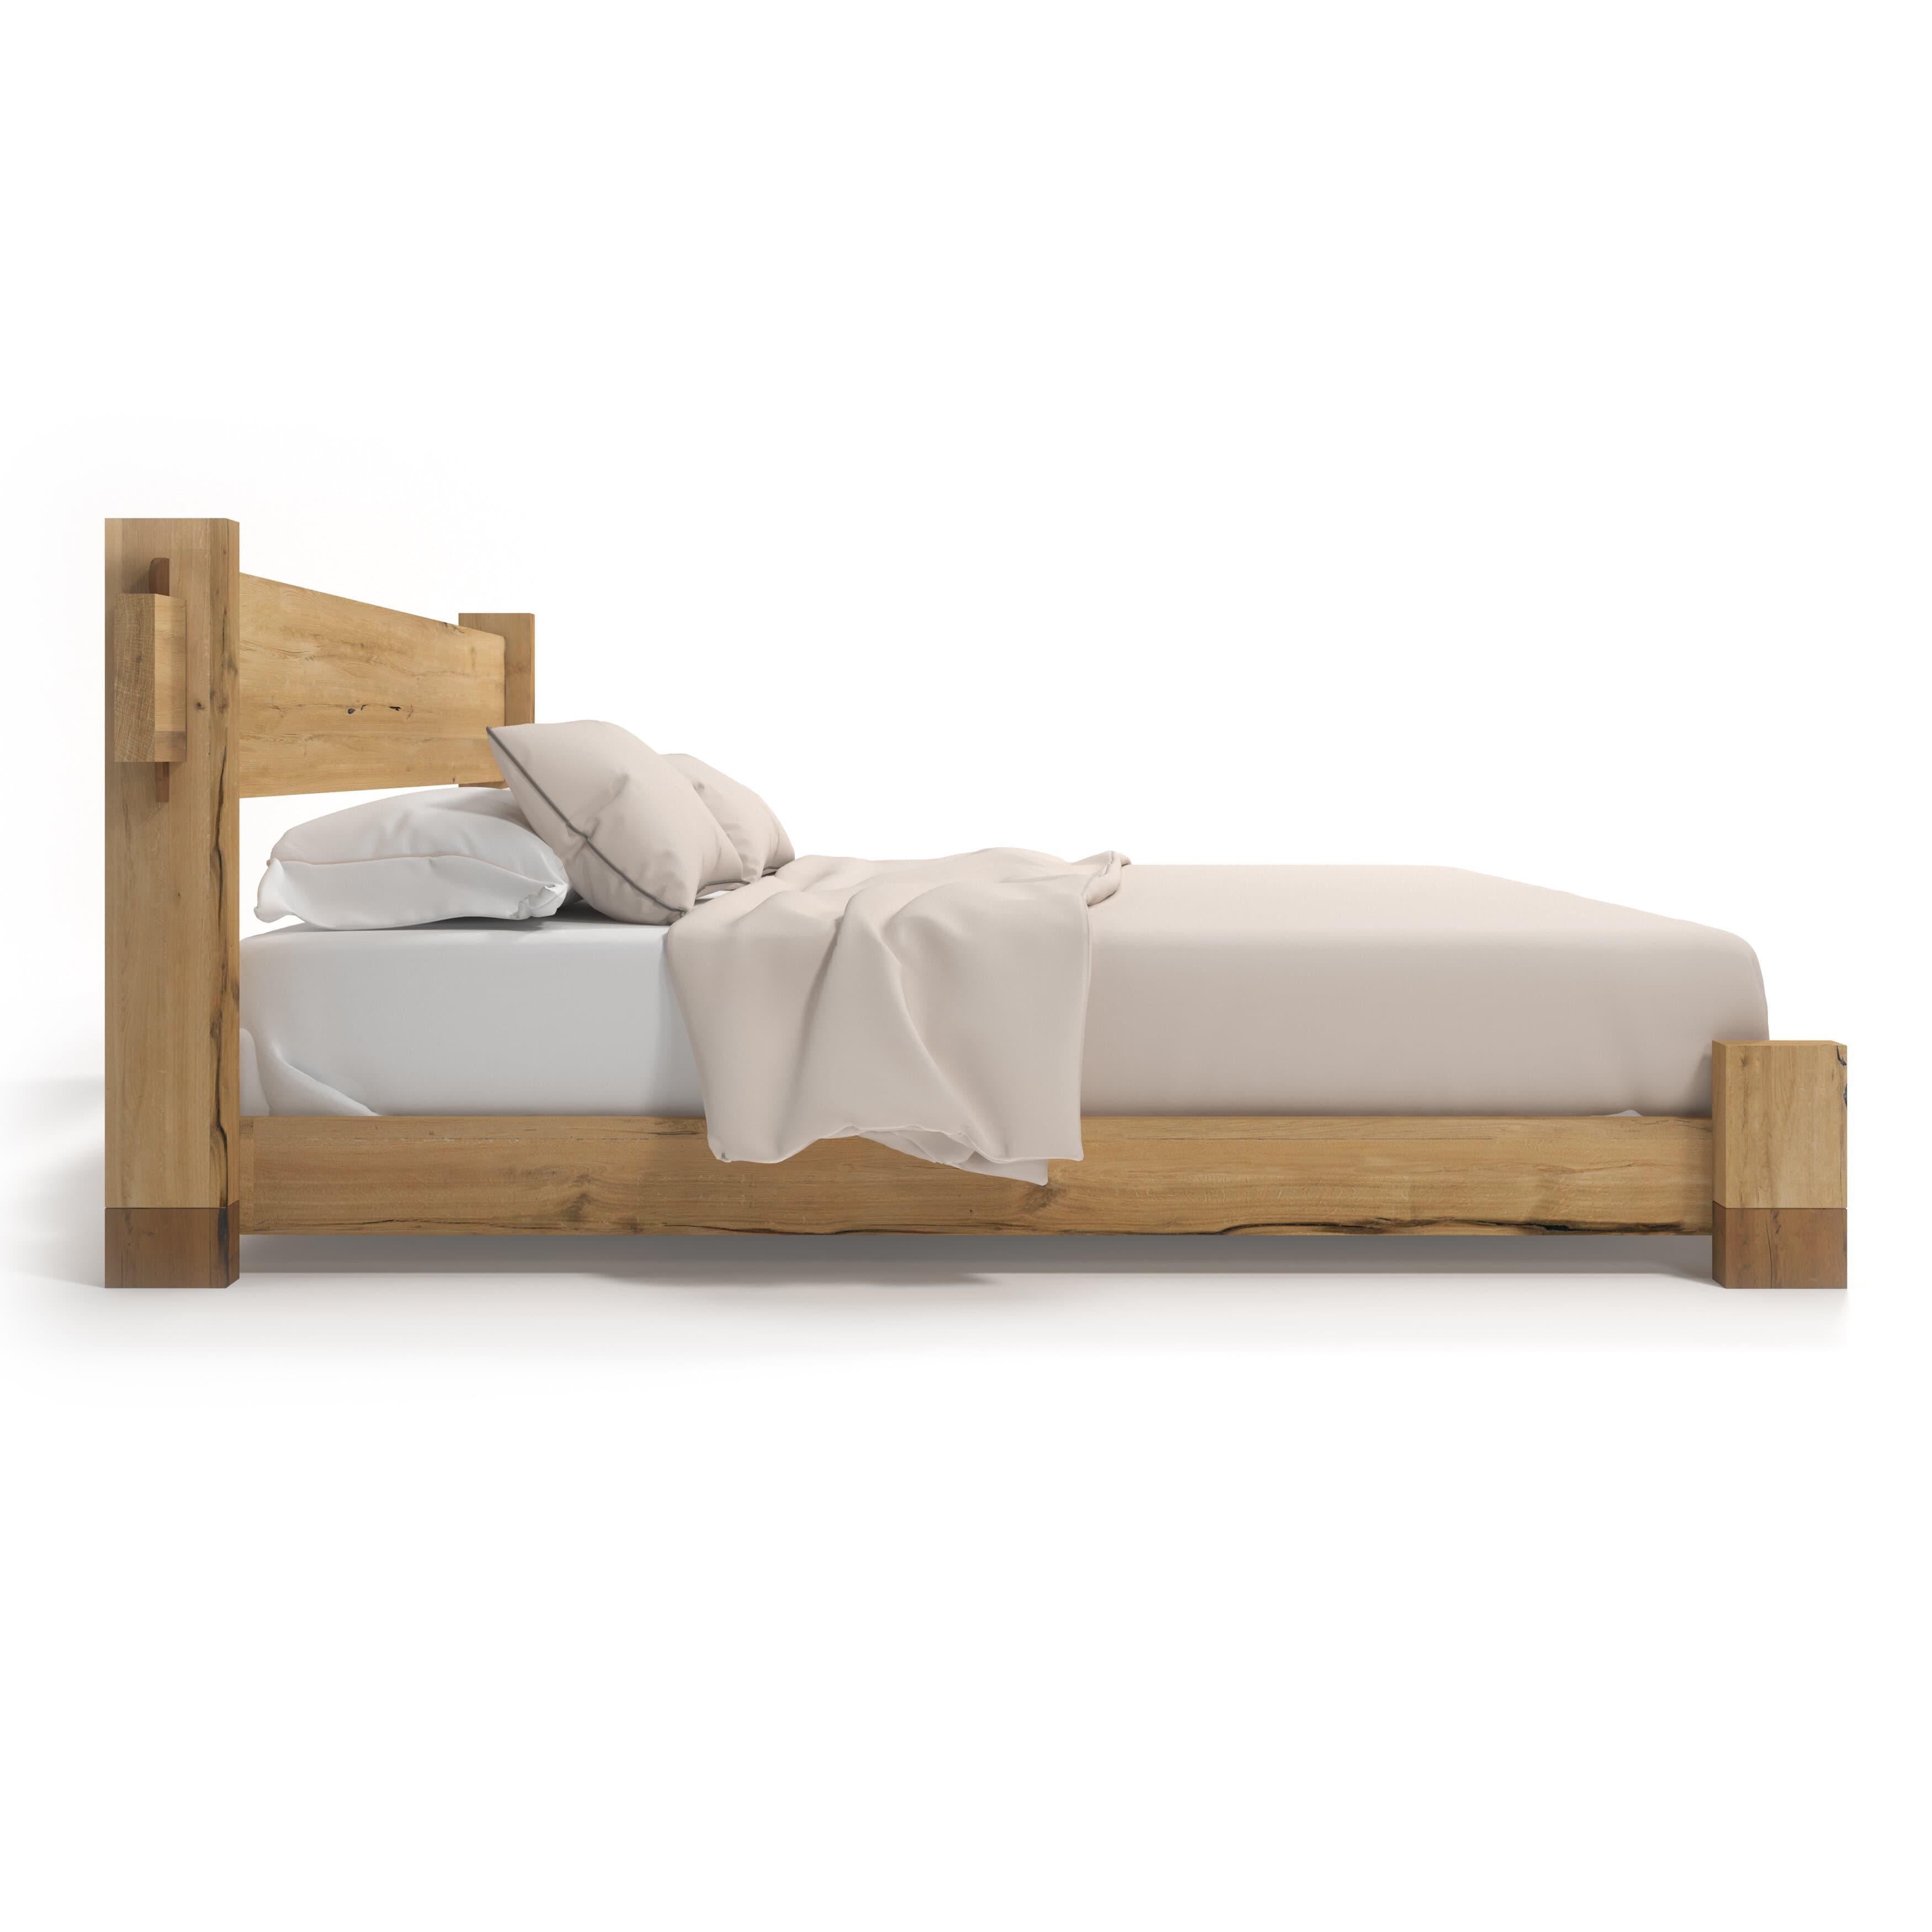 Sink into total relaxation with the Dala-Bed! Crafted from durable massive wooden oak, it ensures beauty and comfort for all your cozy nights. 

All Tektōn pieces are made of natural massive wood.
Small variations may be found due to the nature of